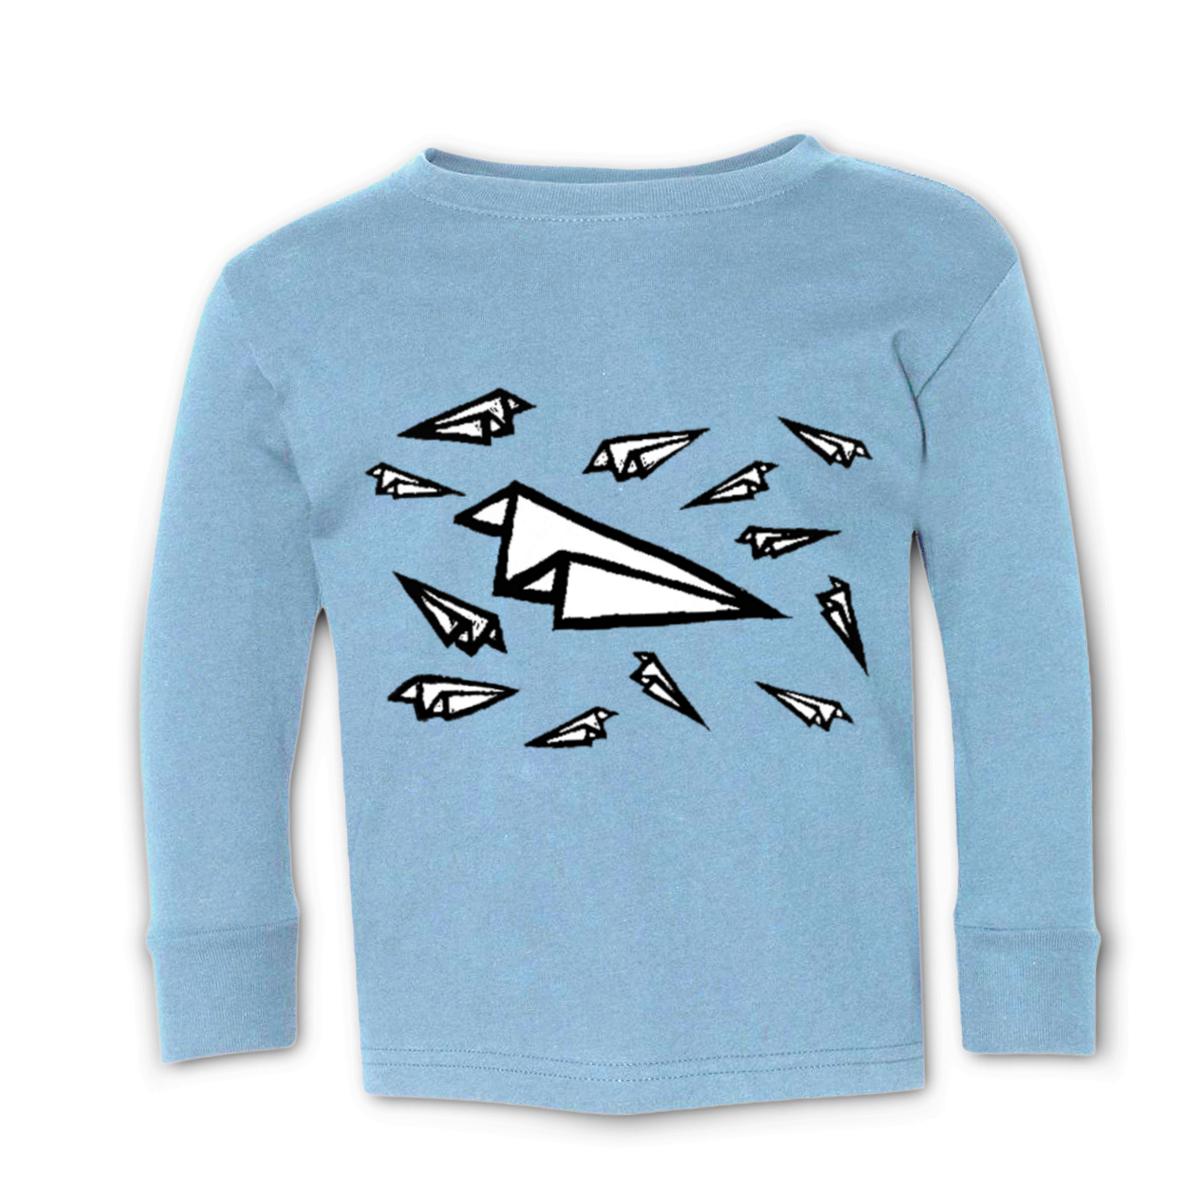 Airplane Frenzy Toddler Long Sleeve Tee 4T light-blue